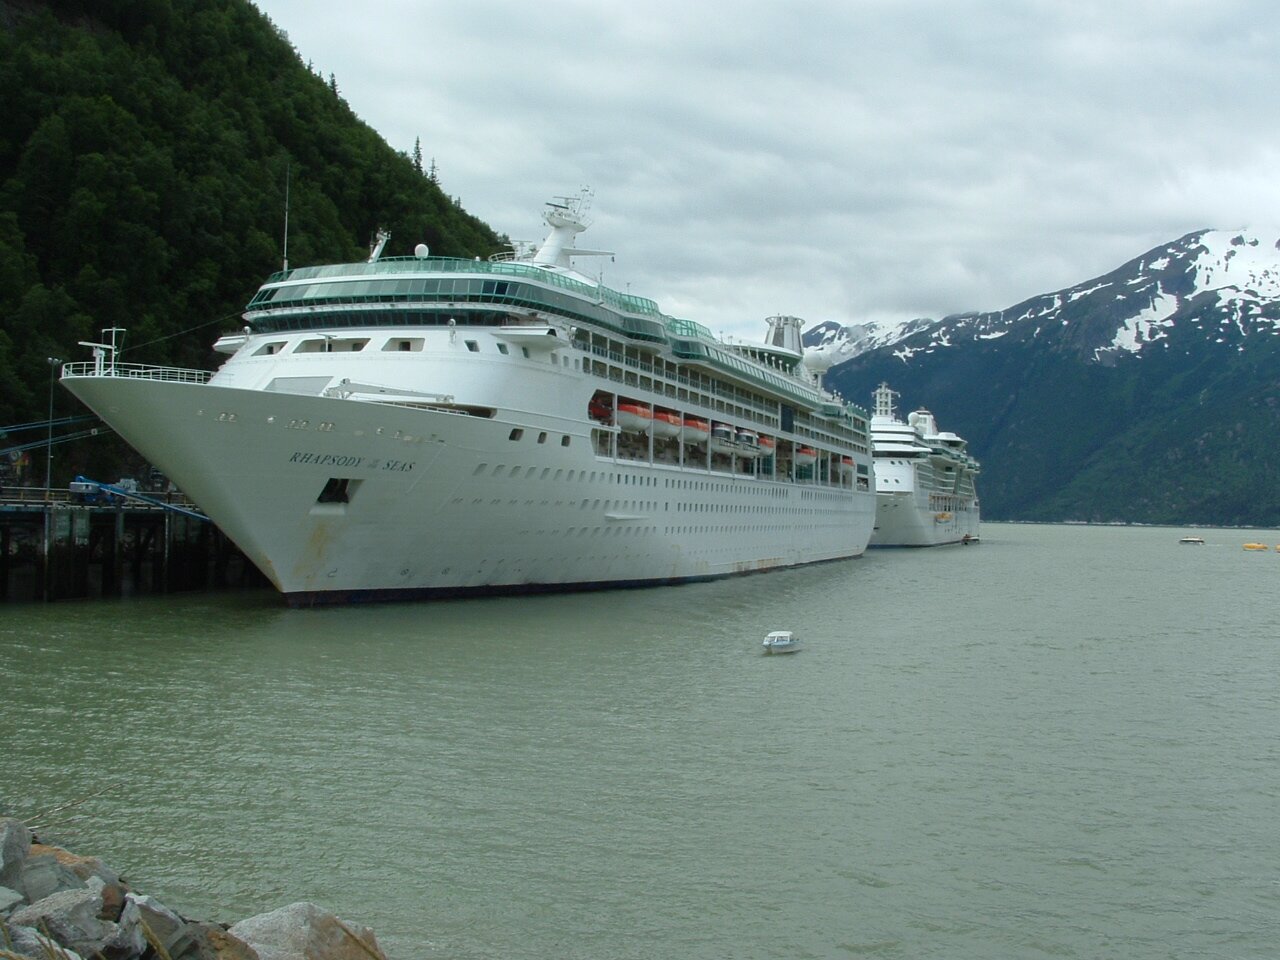 Cruise Ship Photography is a website with the goal to display photographs of cruise ships all around the world.